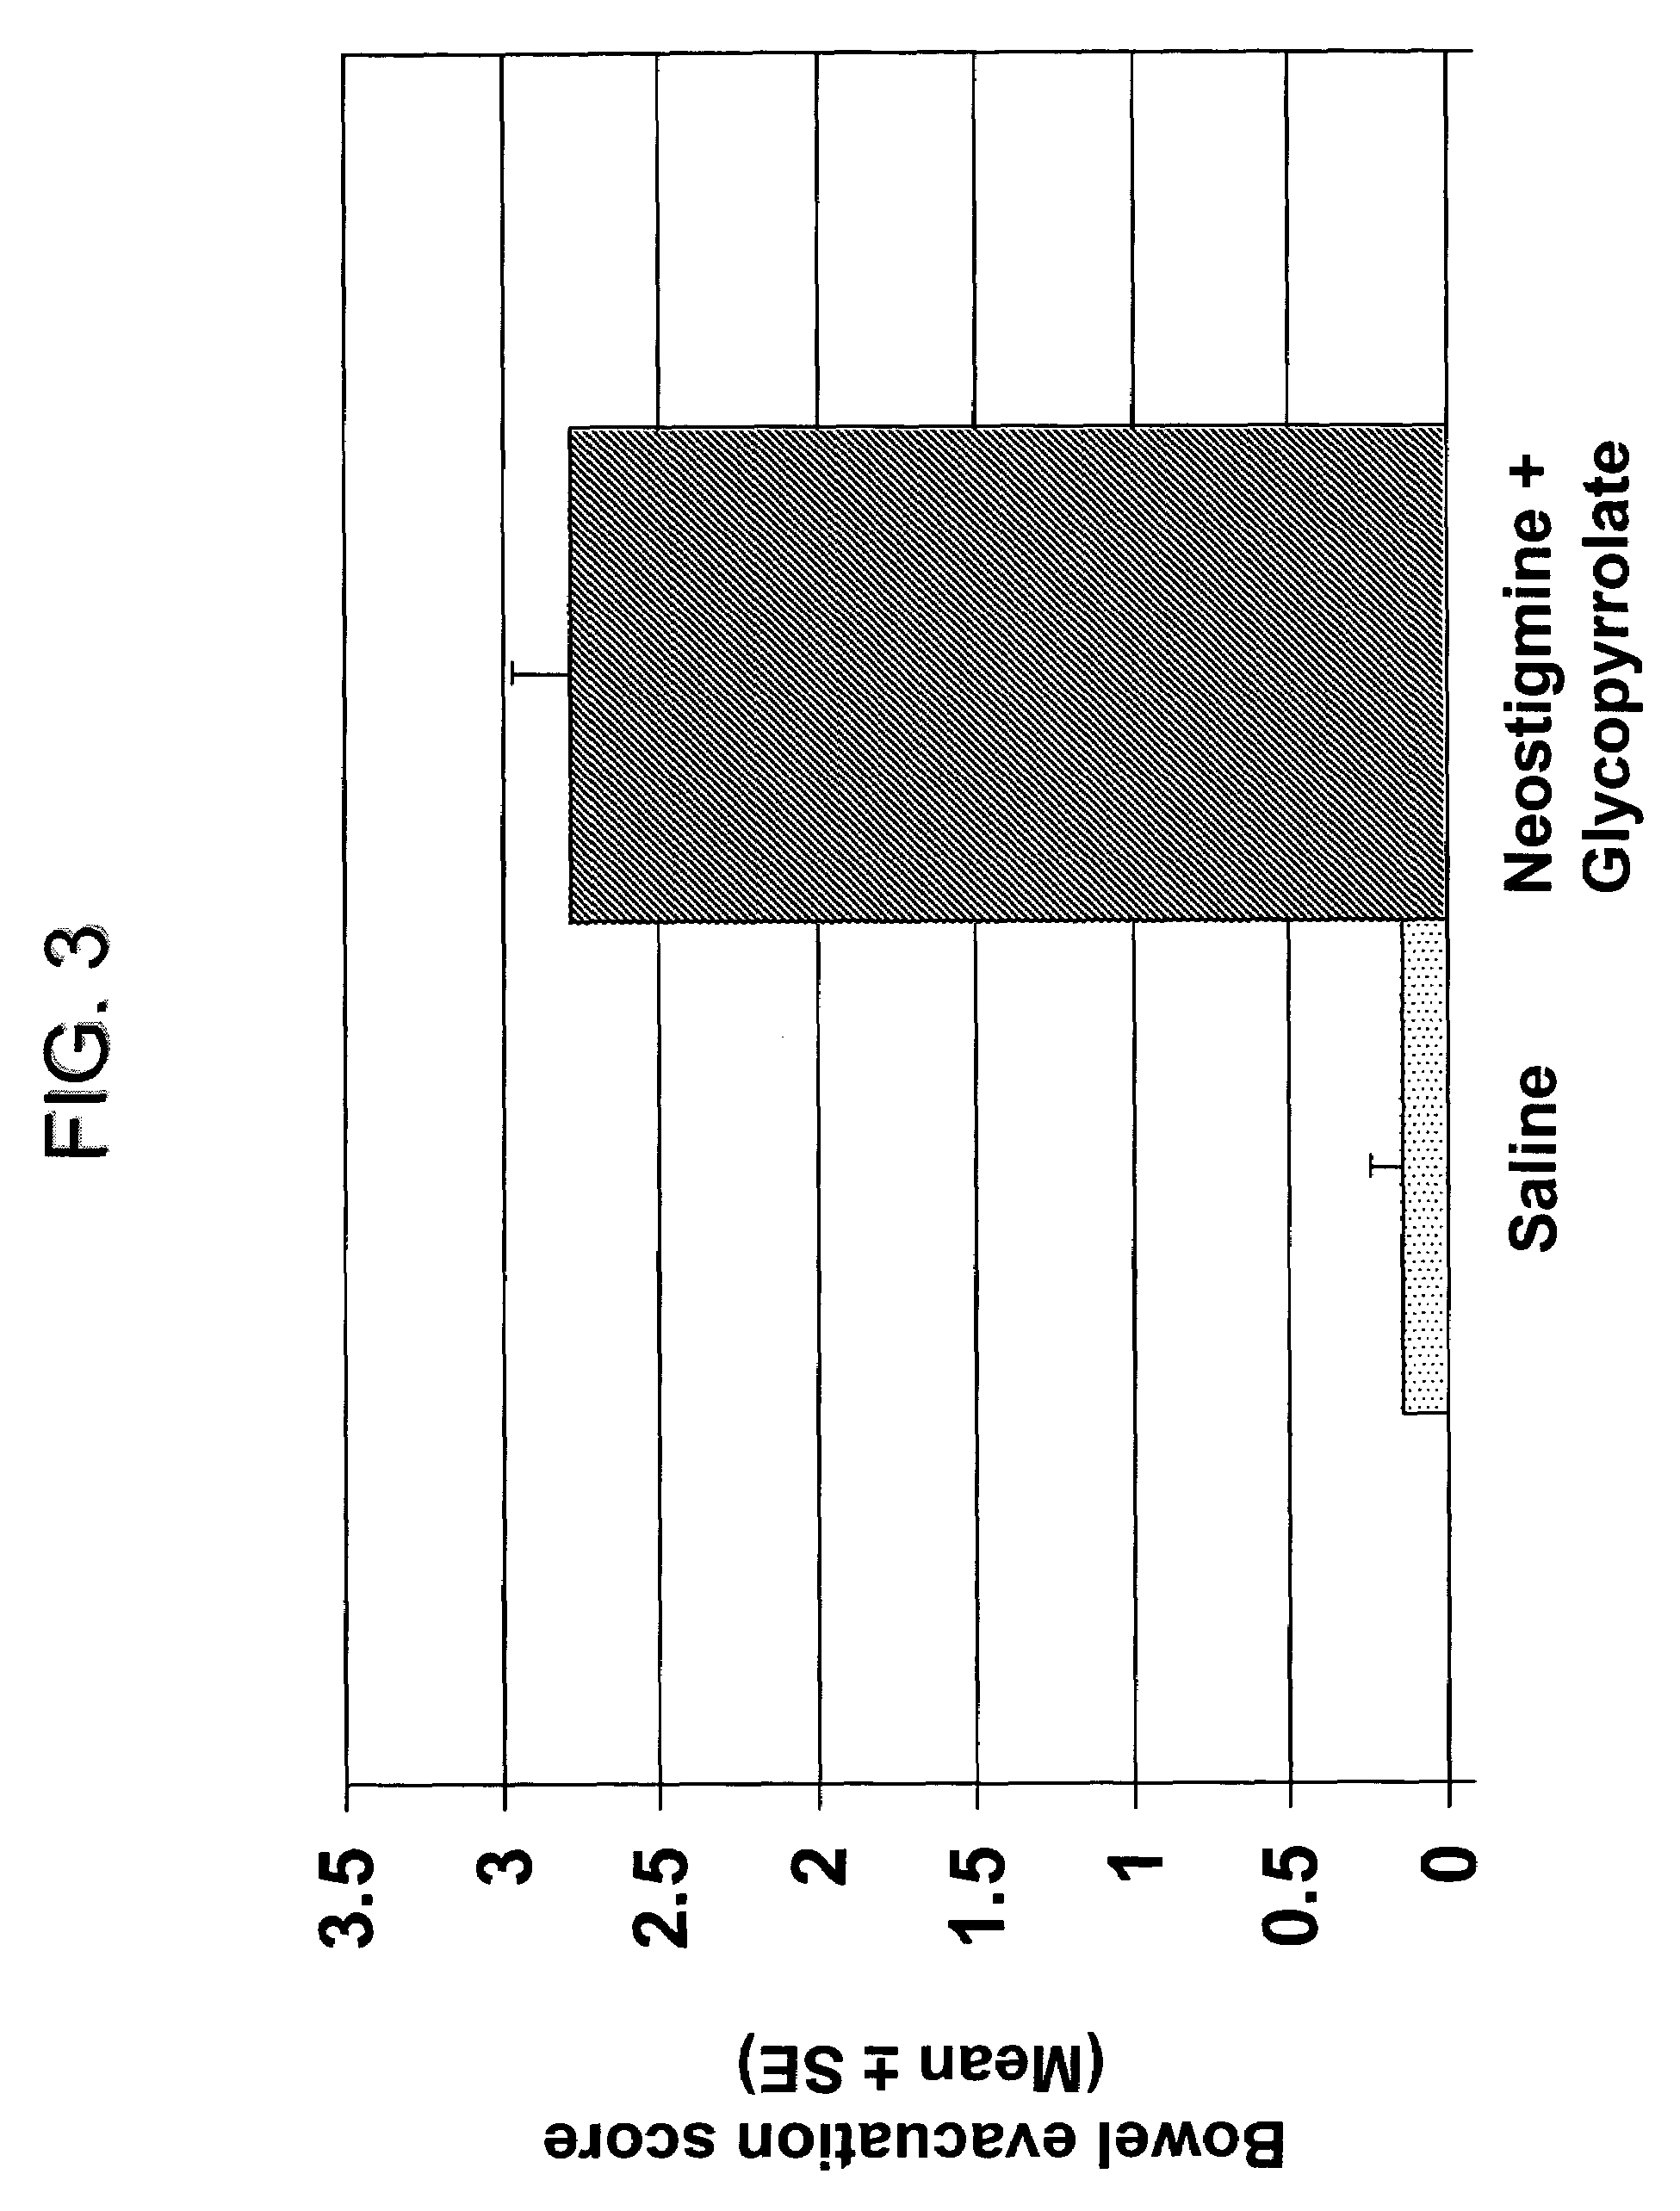 Compositions and methods for bowel care in individuals with chronic intestinal pseudo-obstruction